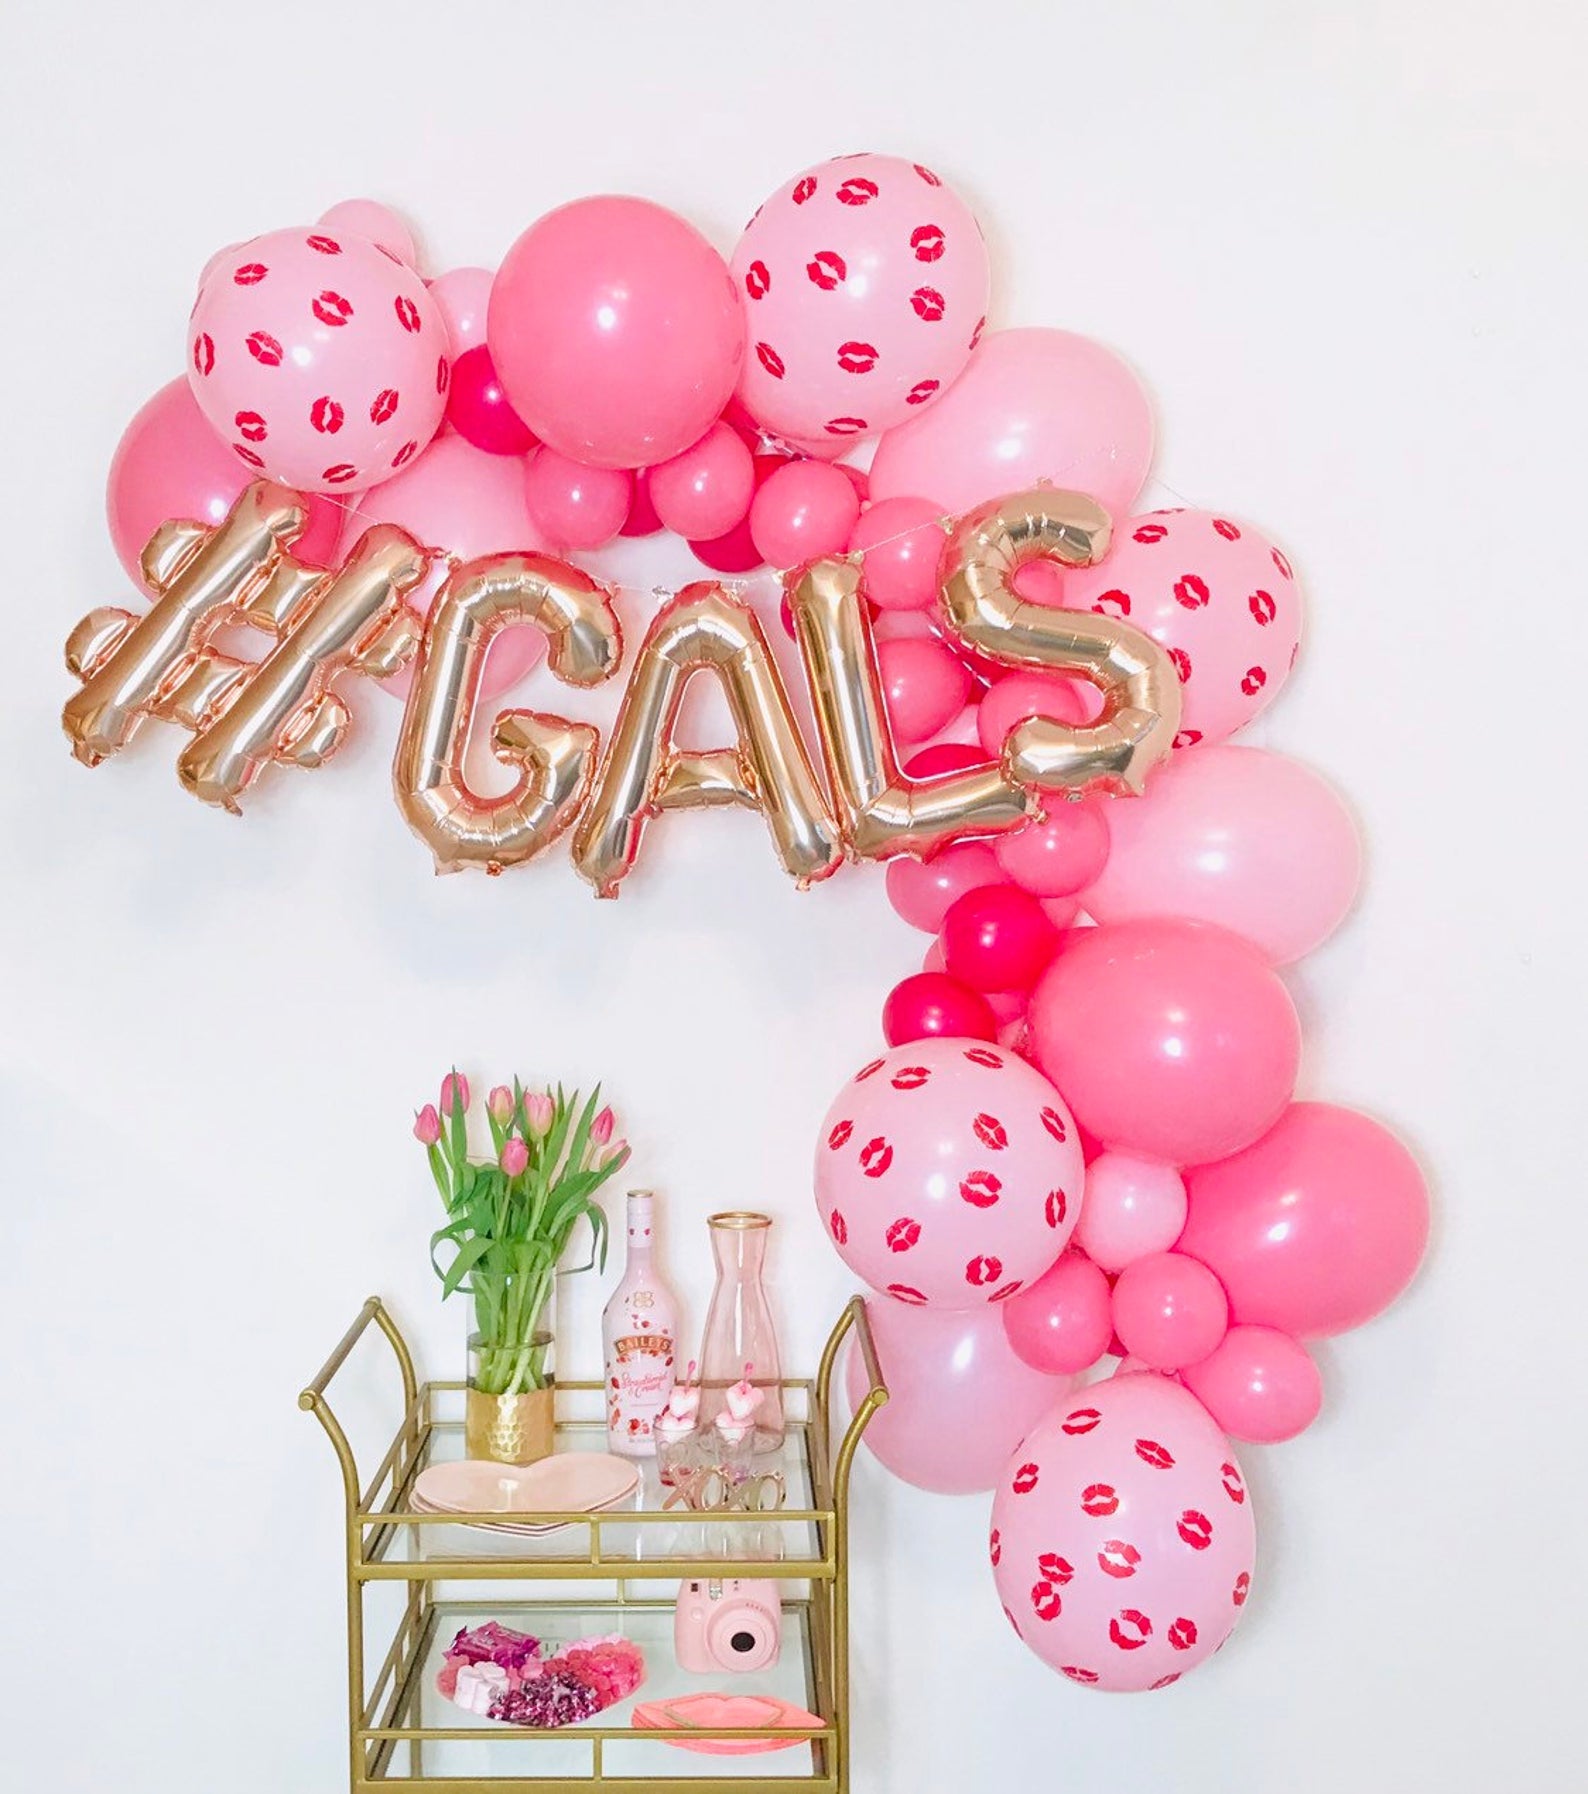 Valentine's Day Party Decorations - #Gals Balloon Garland - Galentine's Decorations